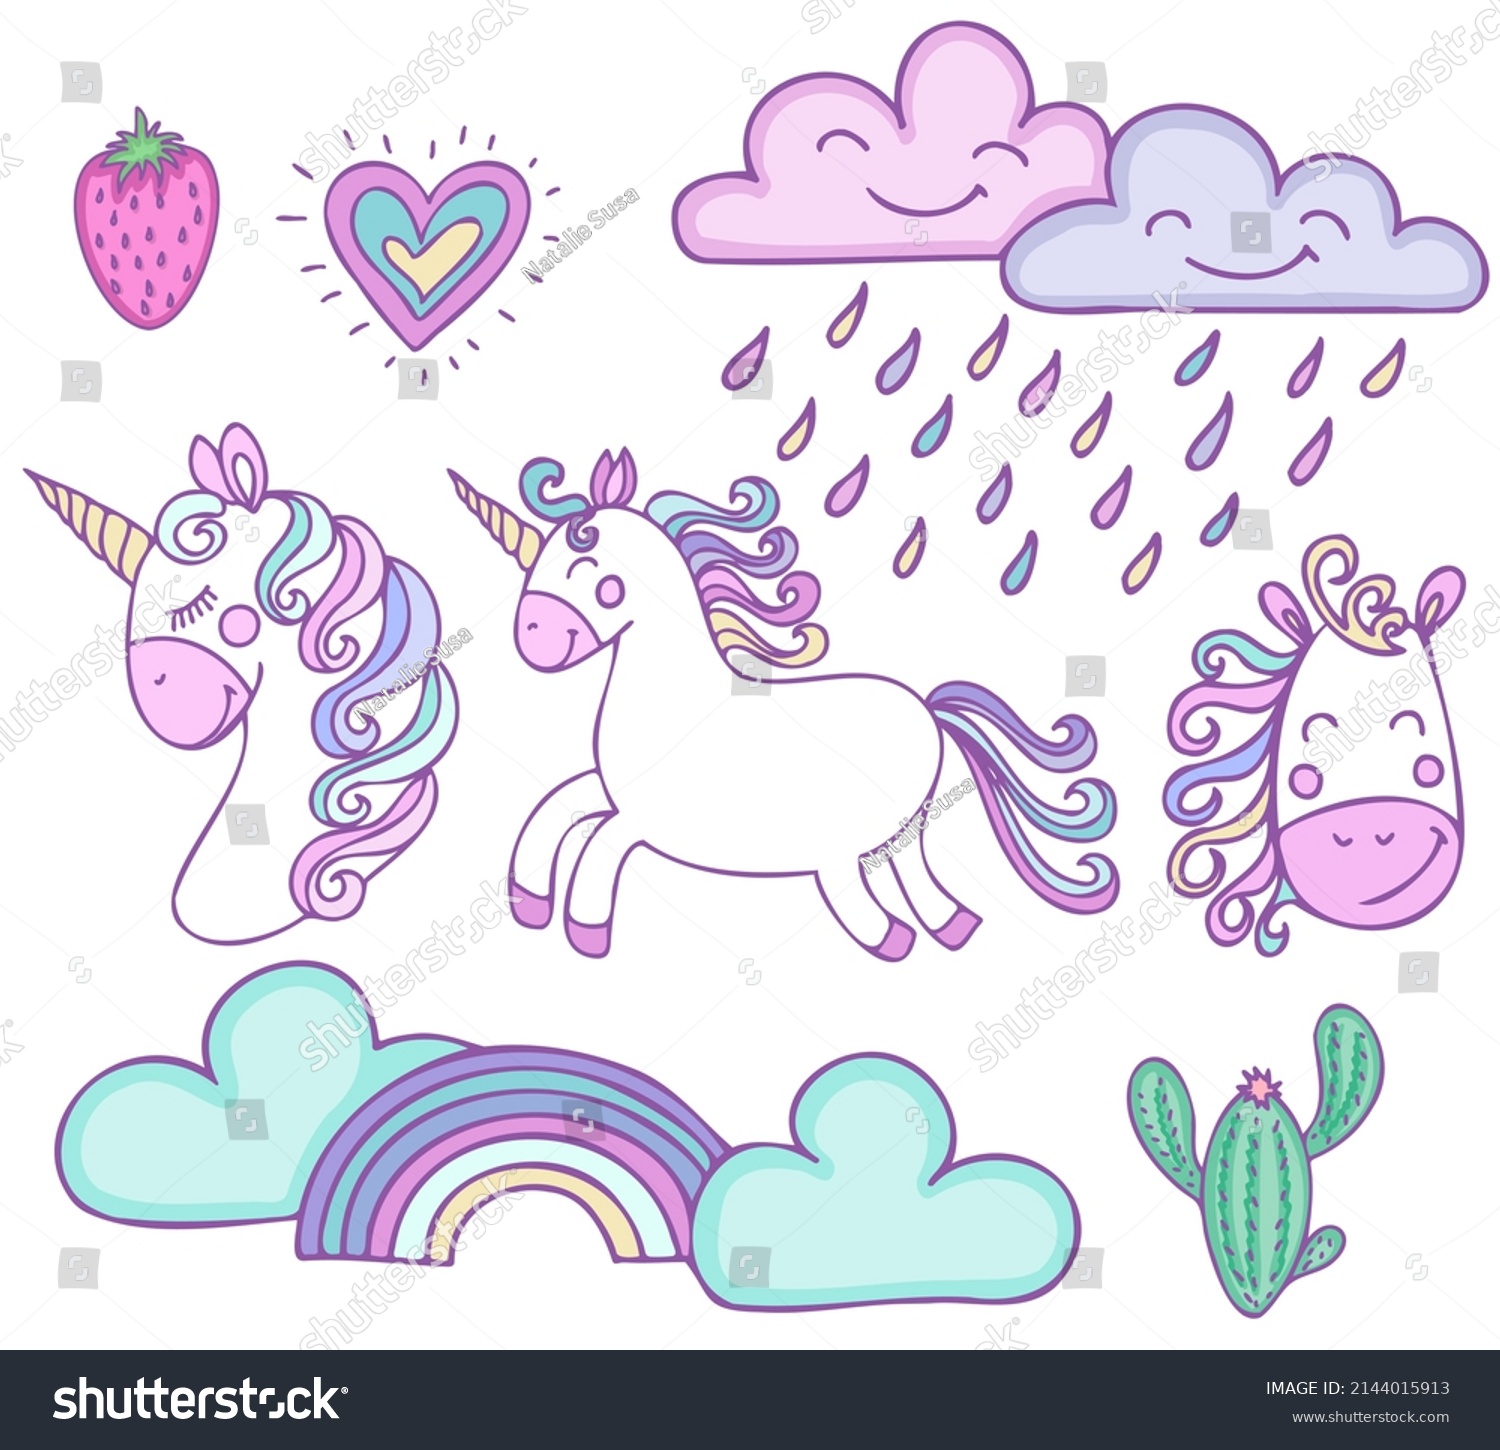 SVG of Cute unicorn clip art with colorful mane.Doodle style vector illustration of rainbow, clouds,cactus, heart isolated on white background.
Suitable for nursery and post card design and svg for cricut svg